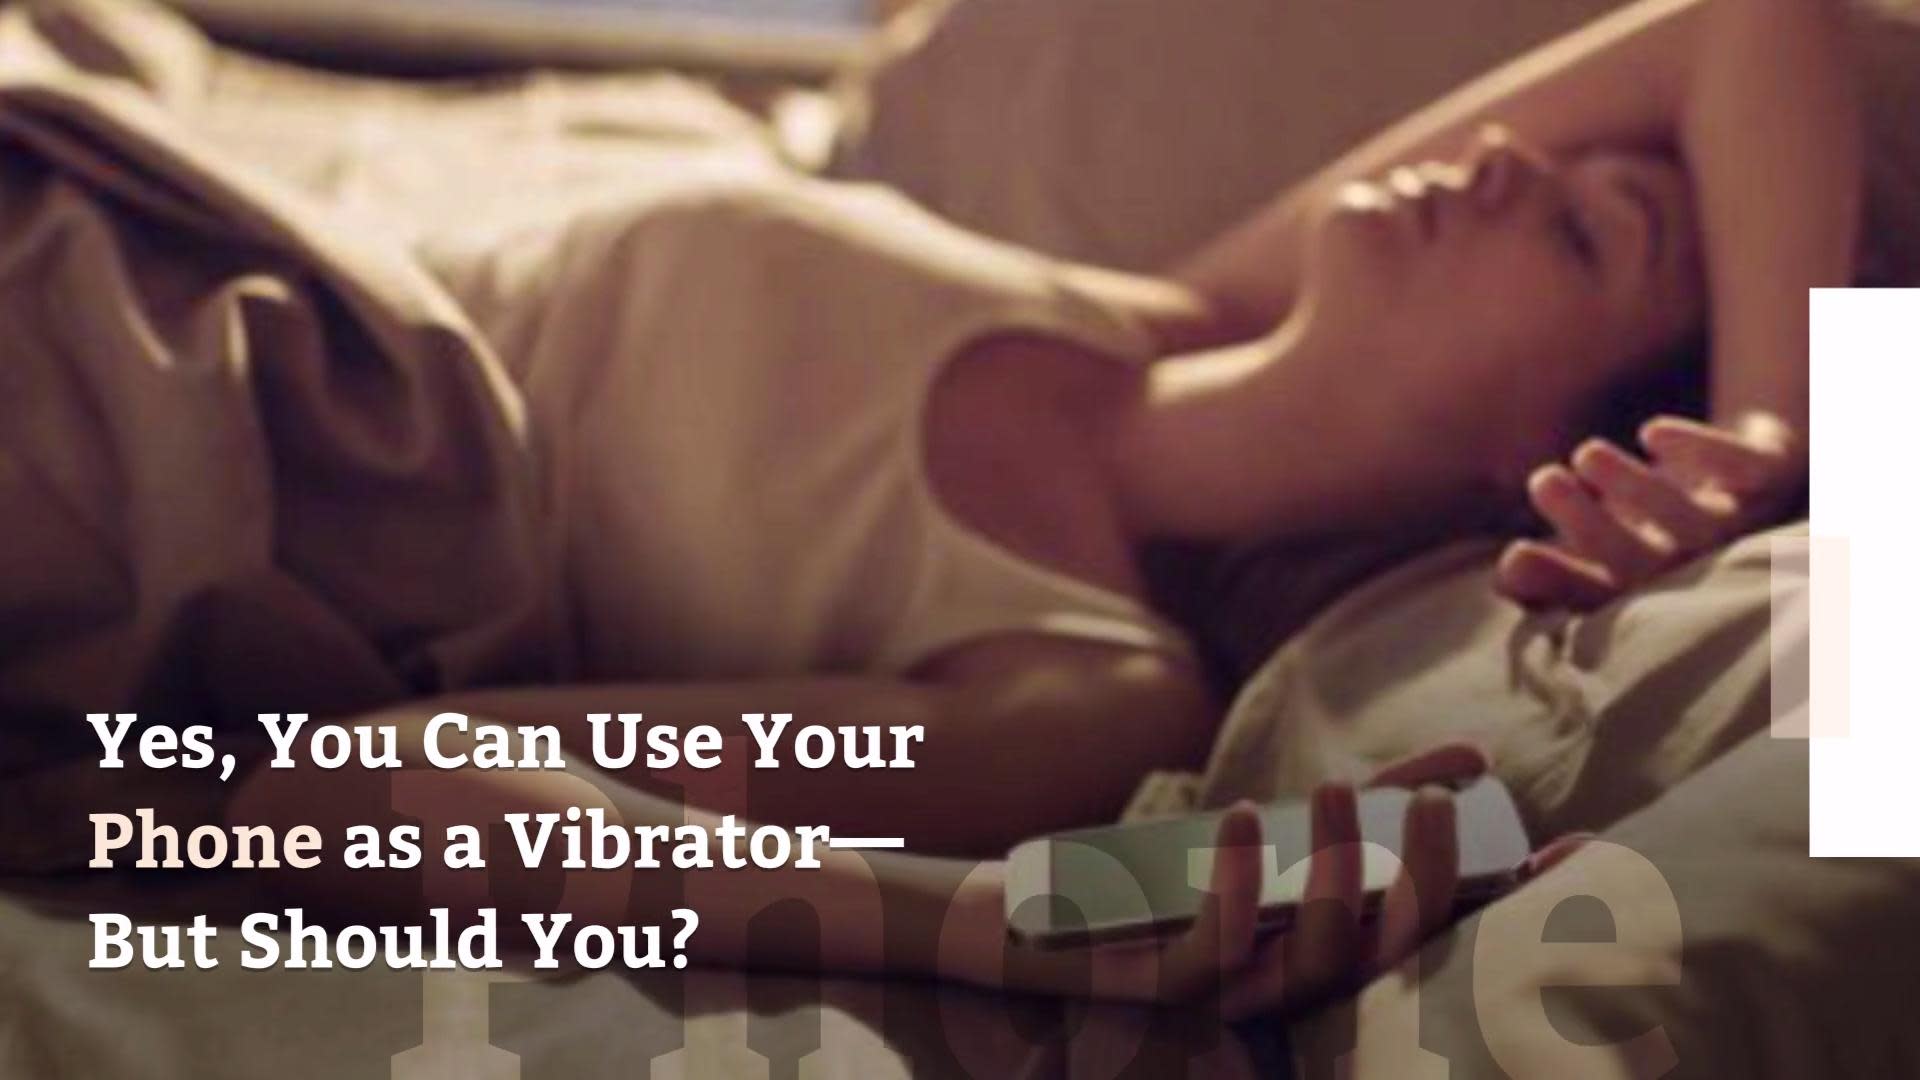 Yes, You Can Use Your Phone as a Vibrator—But Should You?